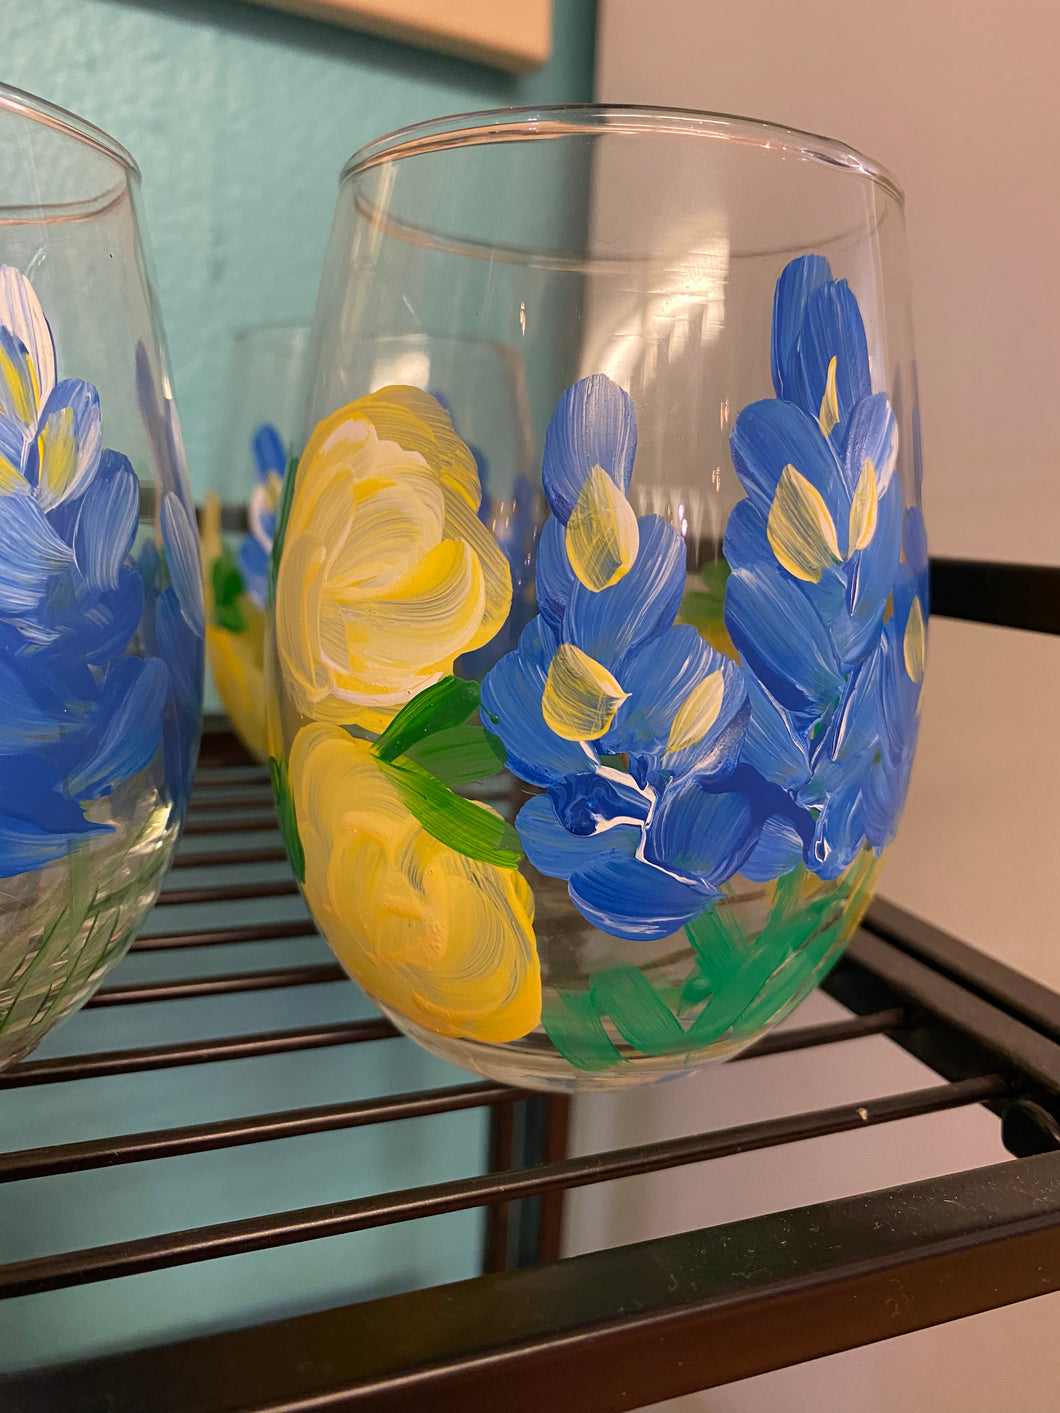 Wine Glasses- bluebonnets and yellow roses